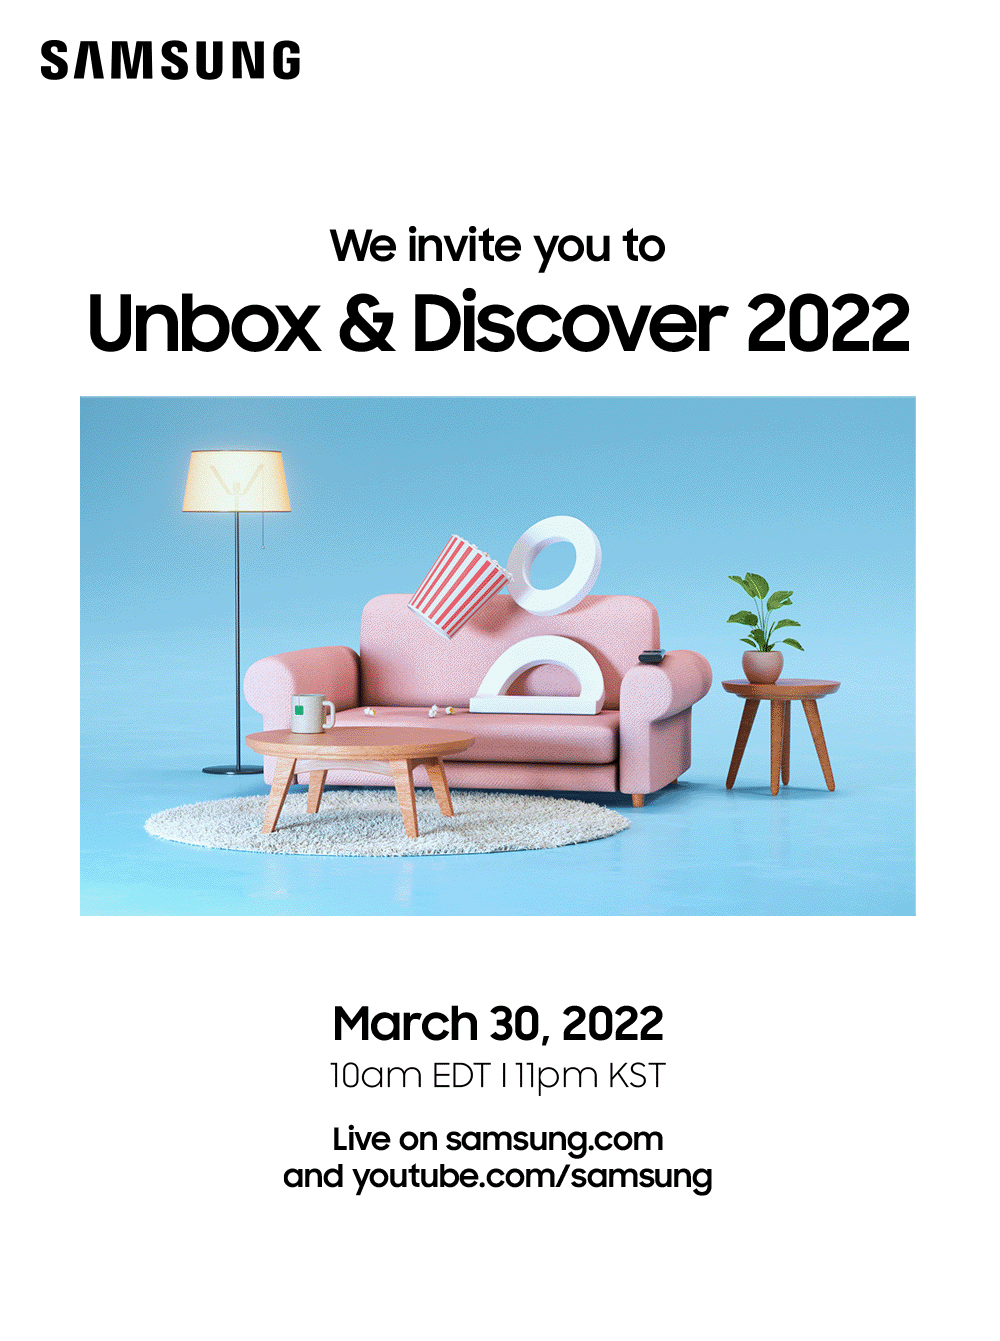 Samsung Electronics will reveal its new television lineup in an online event titled ″Unbox & Discover 2022″ set to take place on March 30 at 11 p.m., the company said Monday. Samsung will introduce new models such as the Neo QLED 8K TVs that use microscopic light emitting diodes (LEDs), or Mini LEDs. ″We will redefine the role of a screen,″ the company said. [SAMSUNG ELECTRONICS]